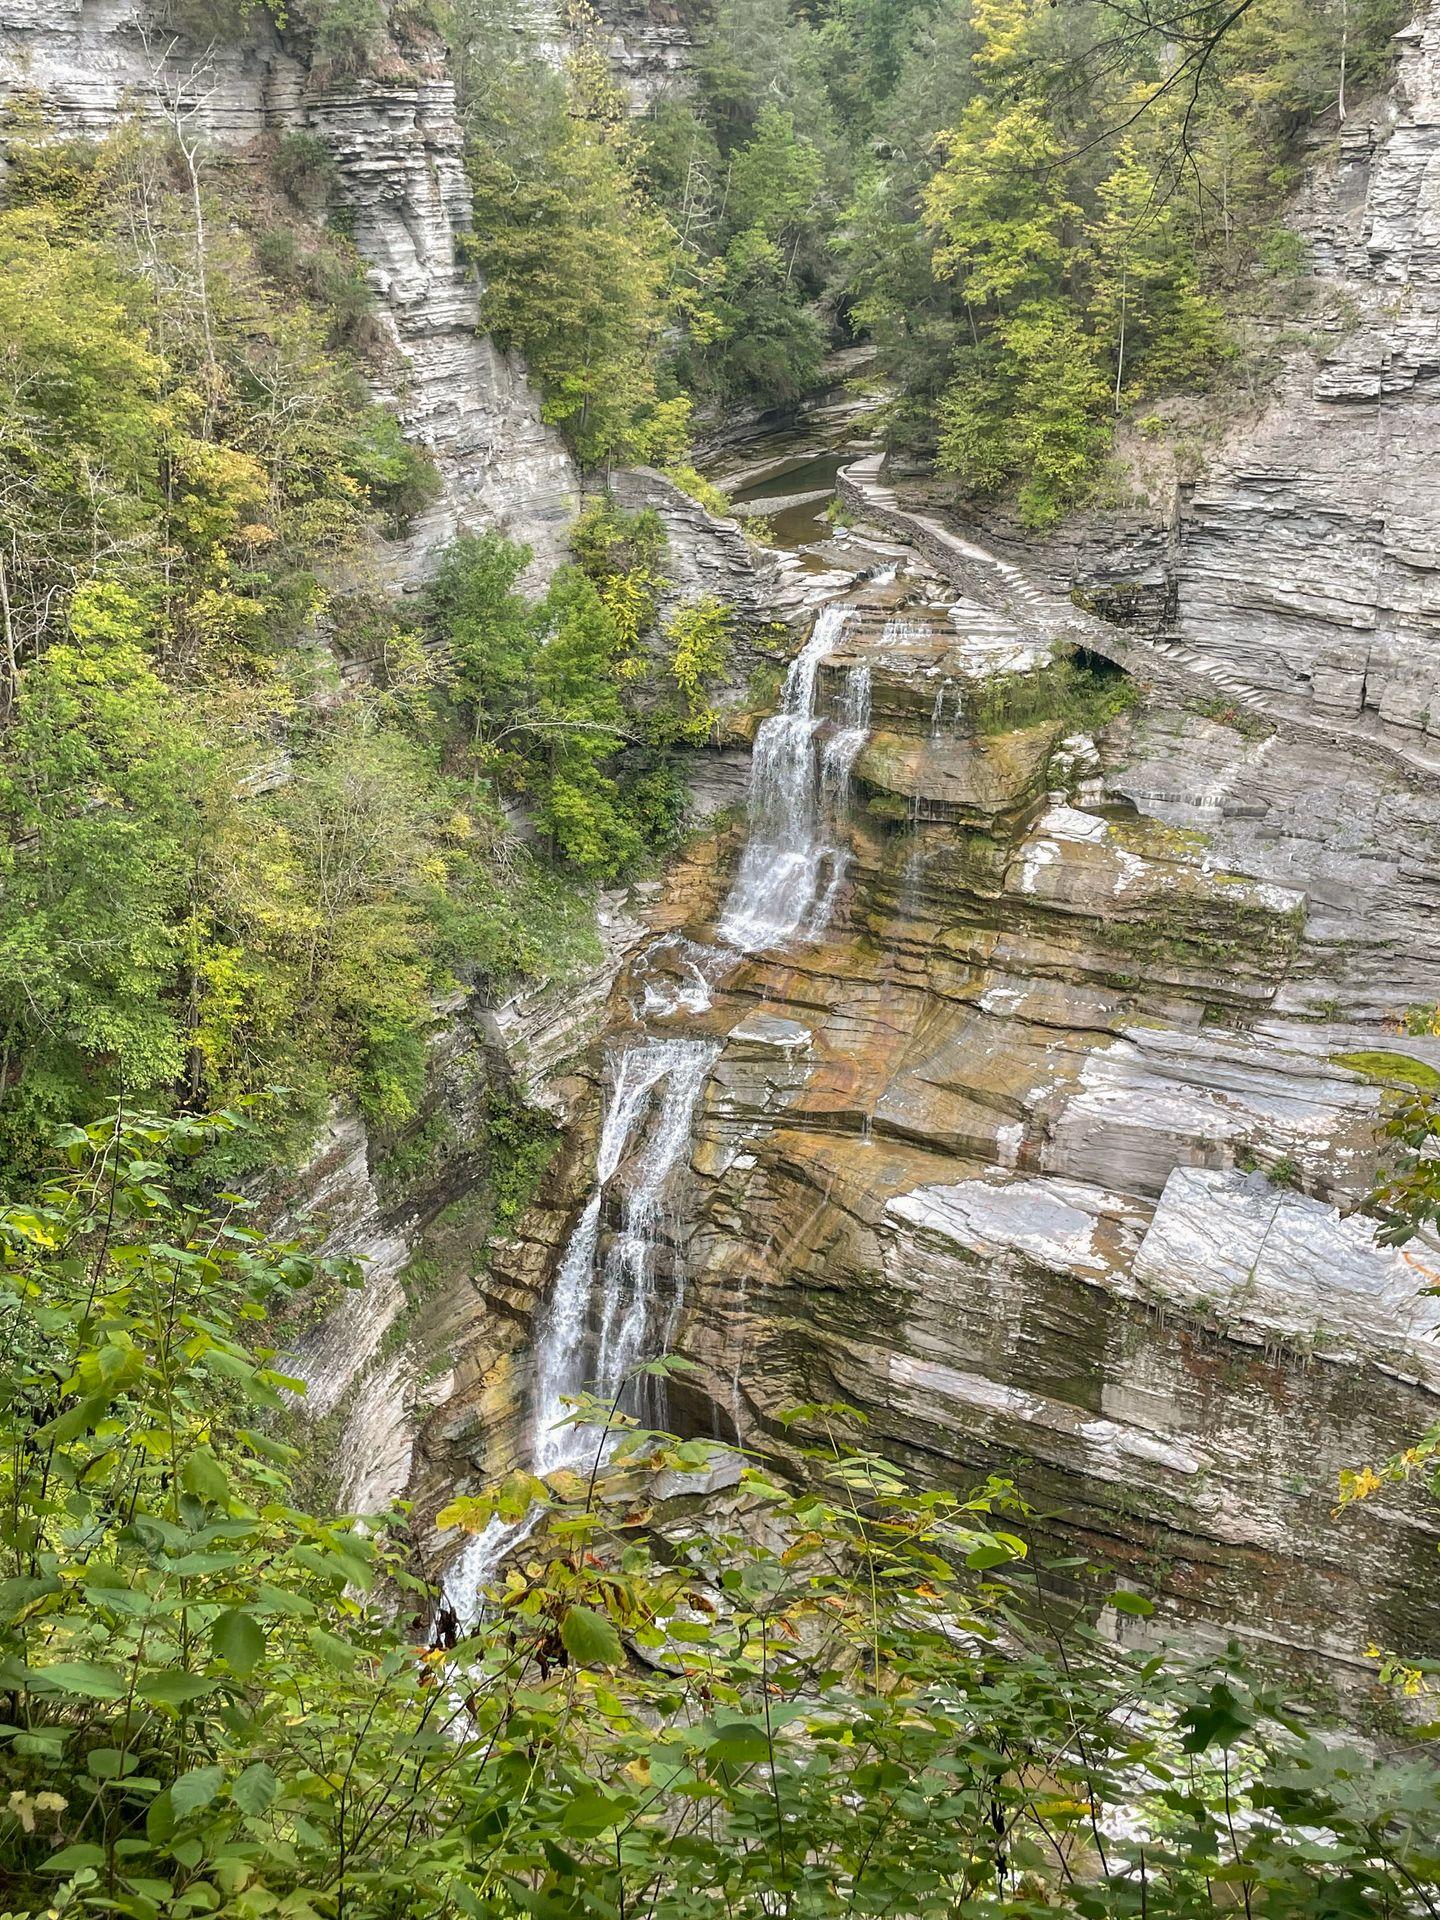 A narrow waterfall falling down a tall gorge at Robert H. Treman State Park.